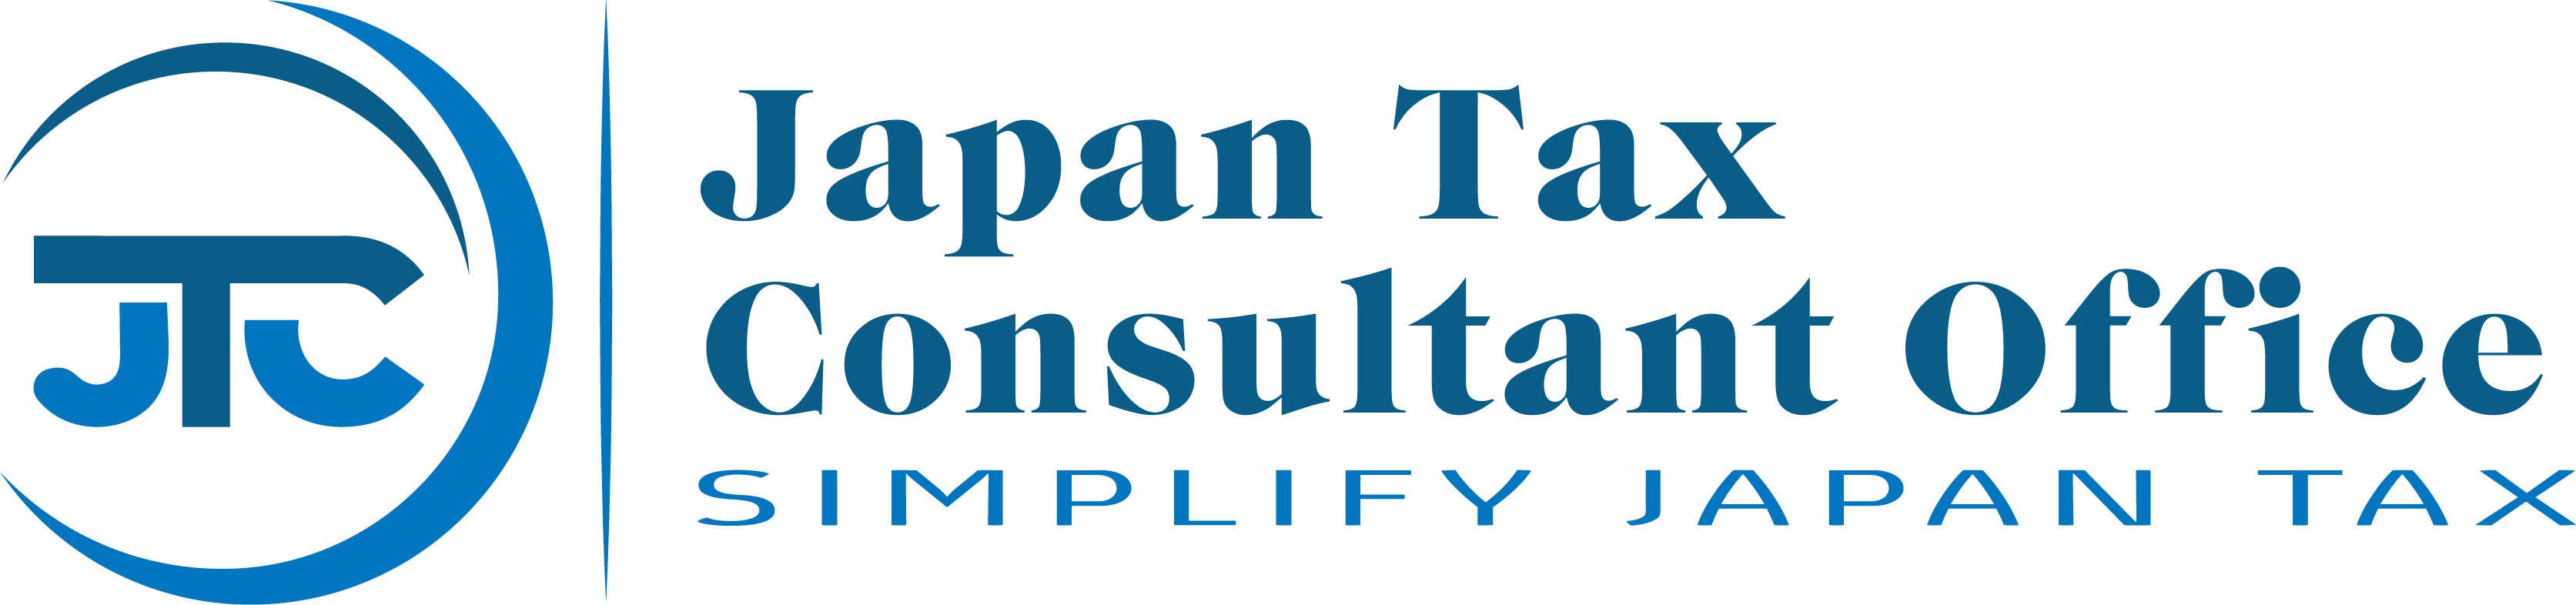 Japan Tax Consultant Office: Aki's Expert Tax Services in English